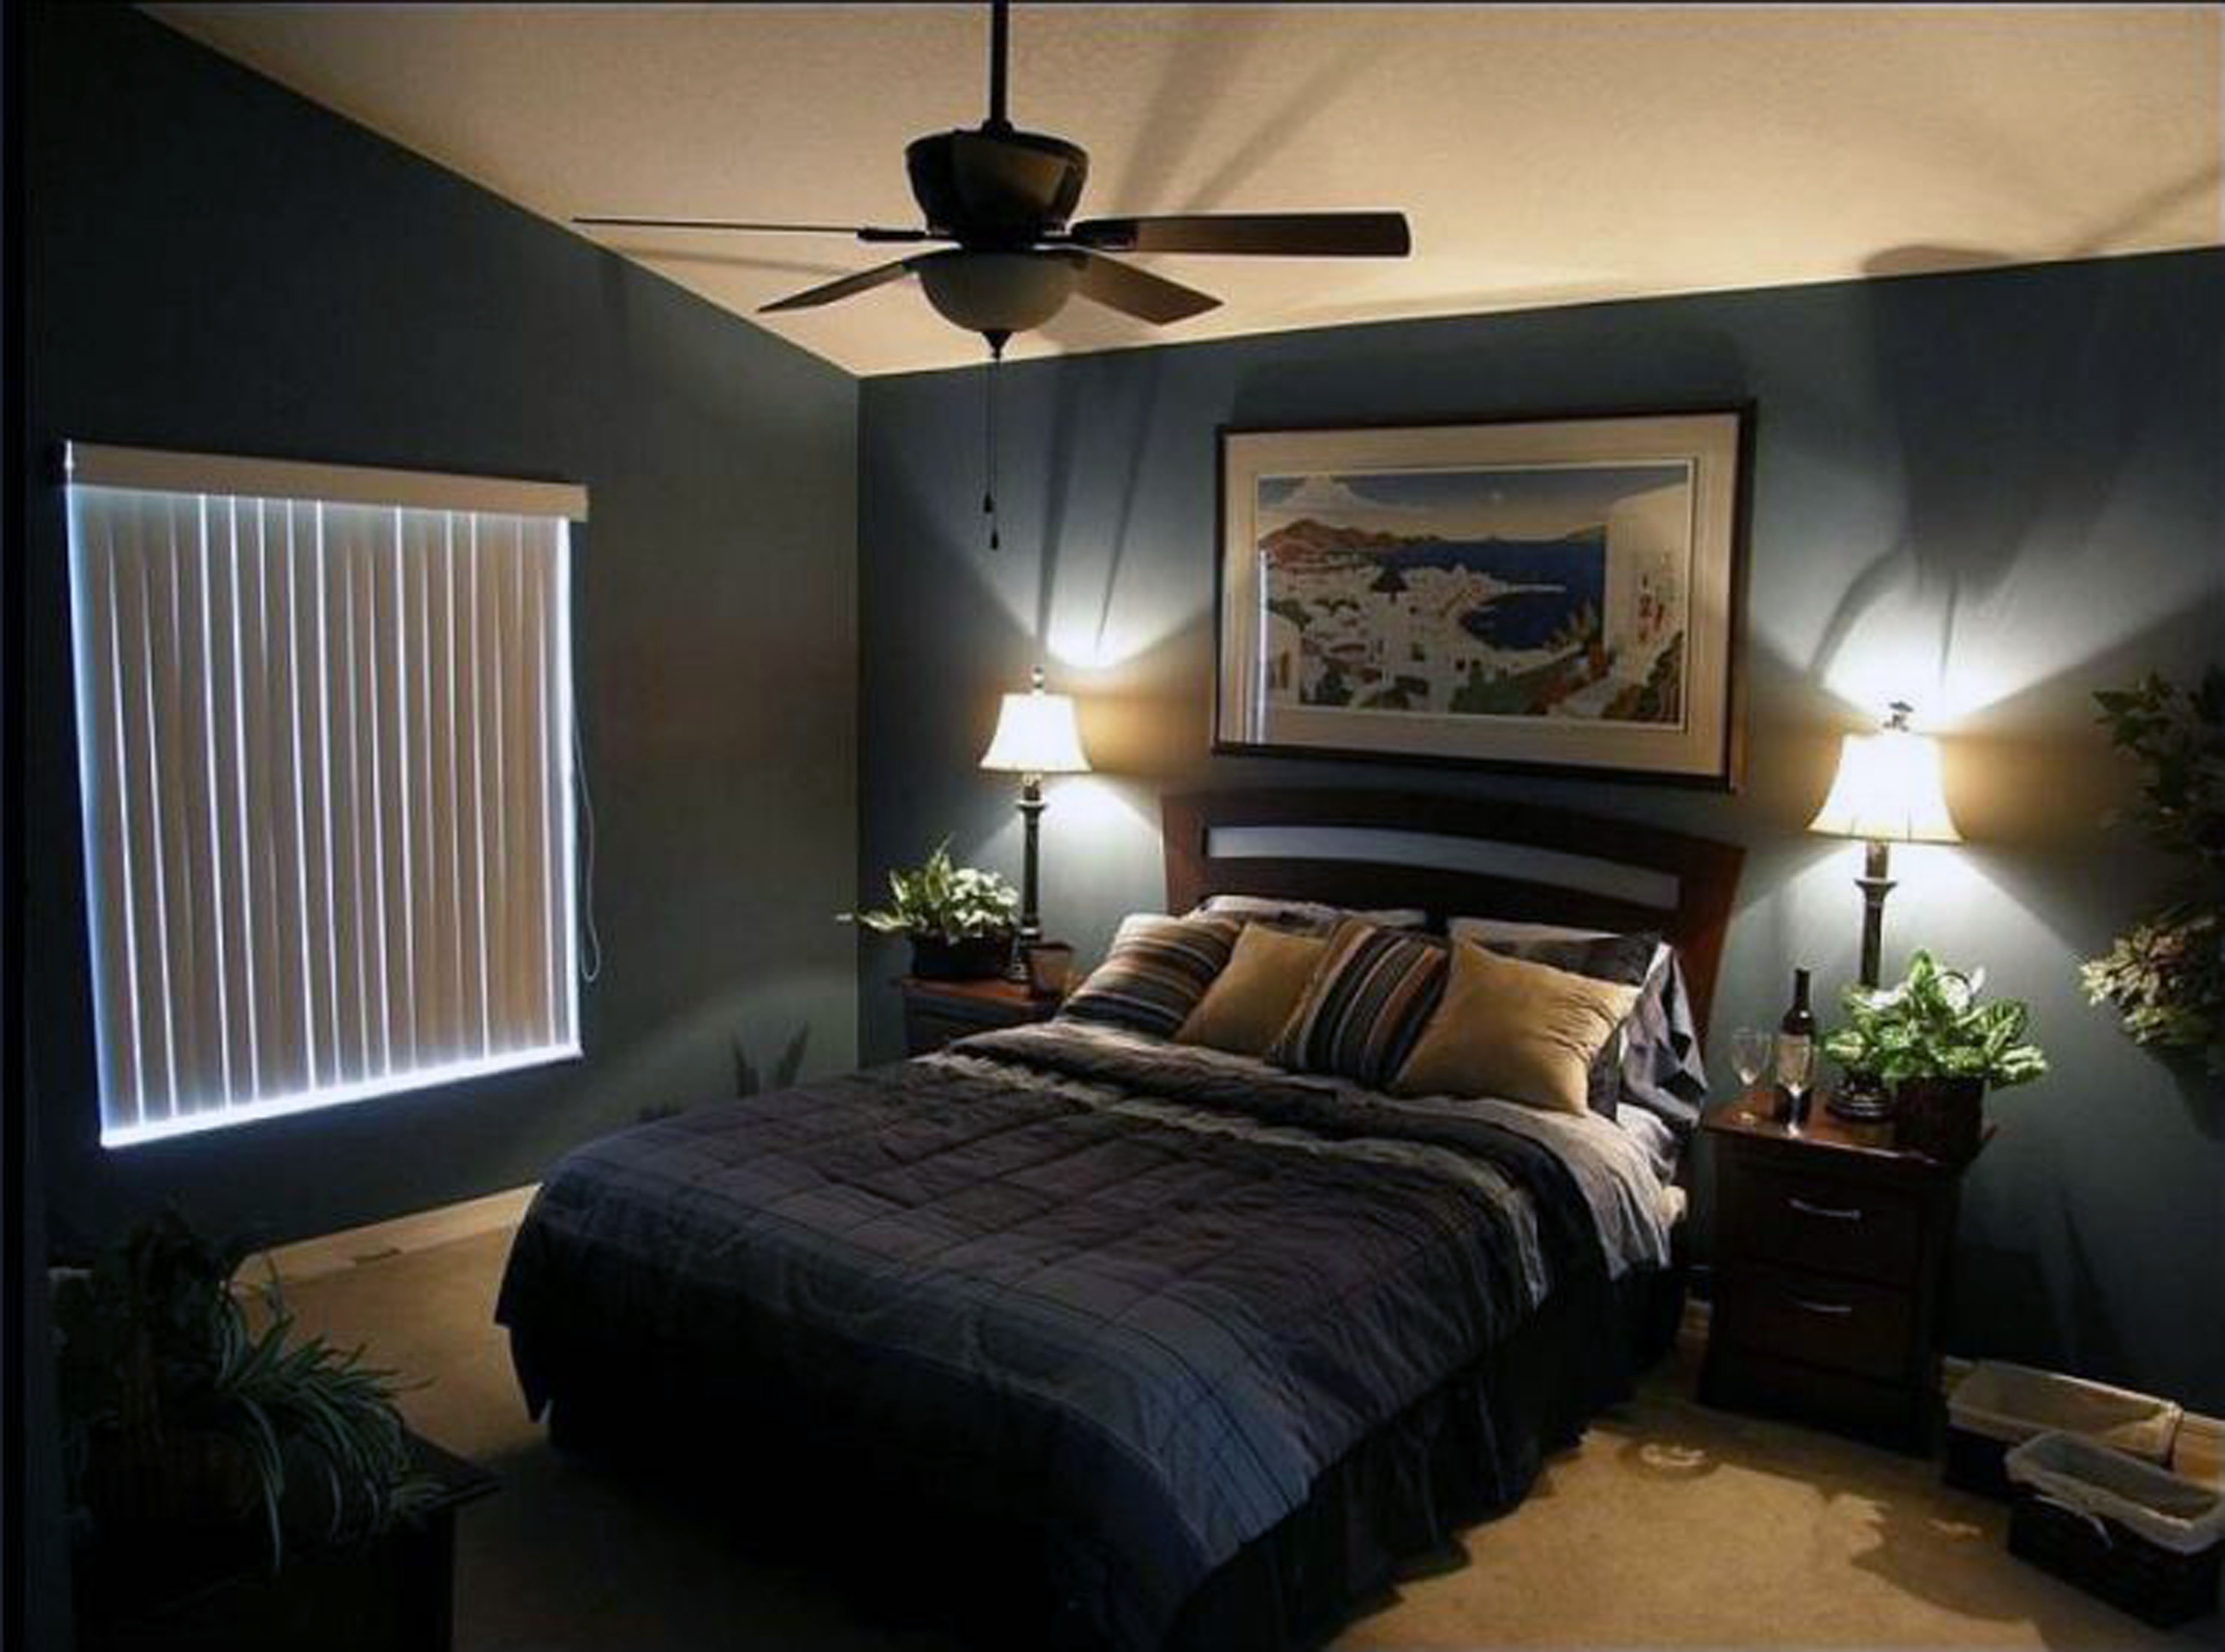 Bedroom Decorating Ideas With Dark Furniture Is A Nice Wallpaper